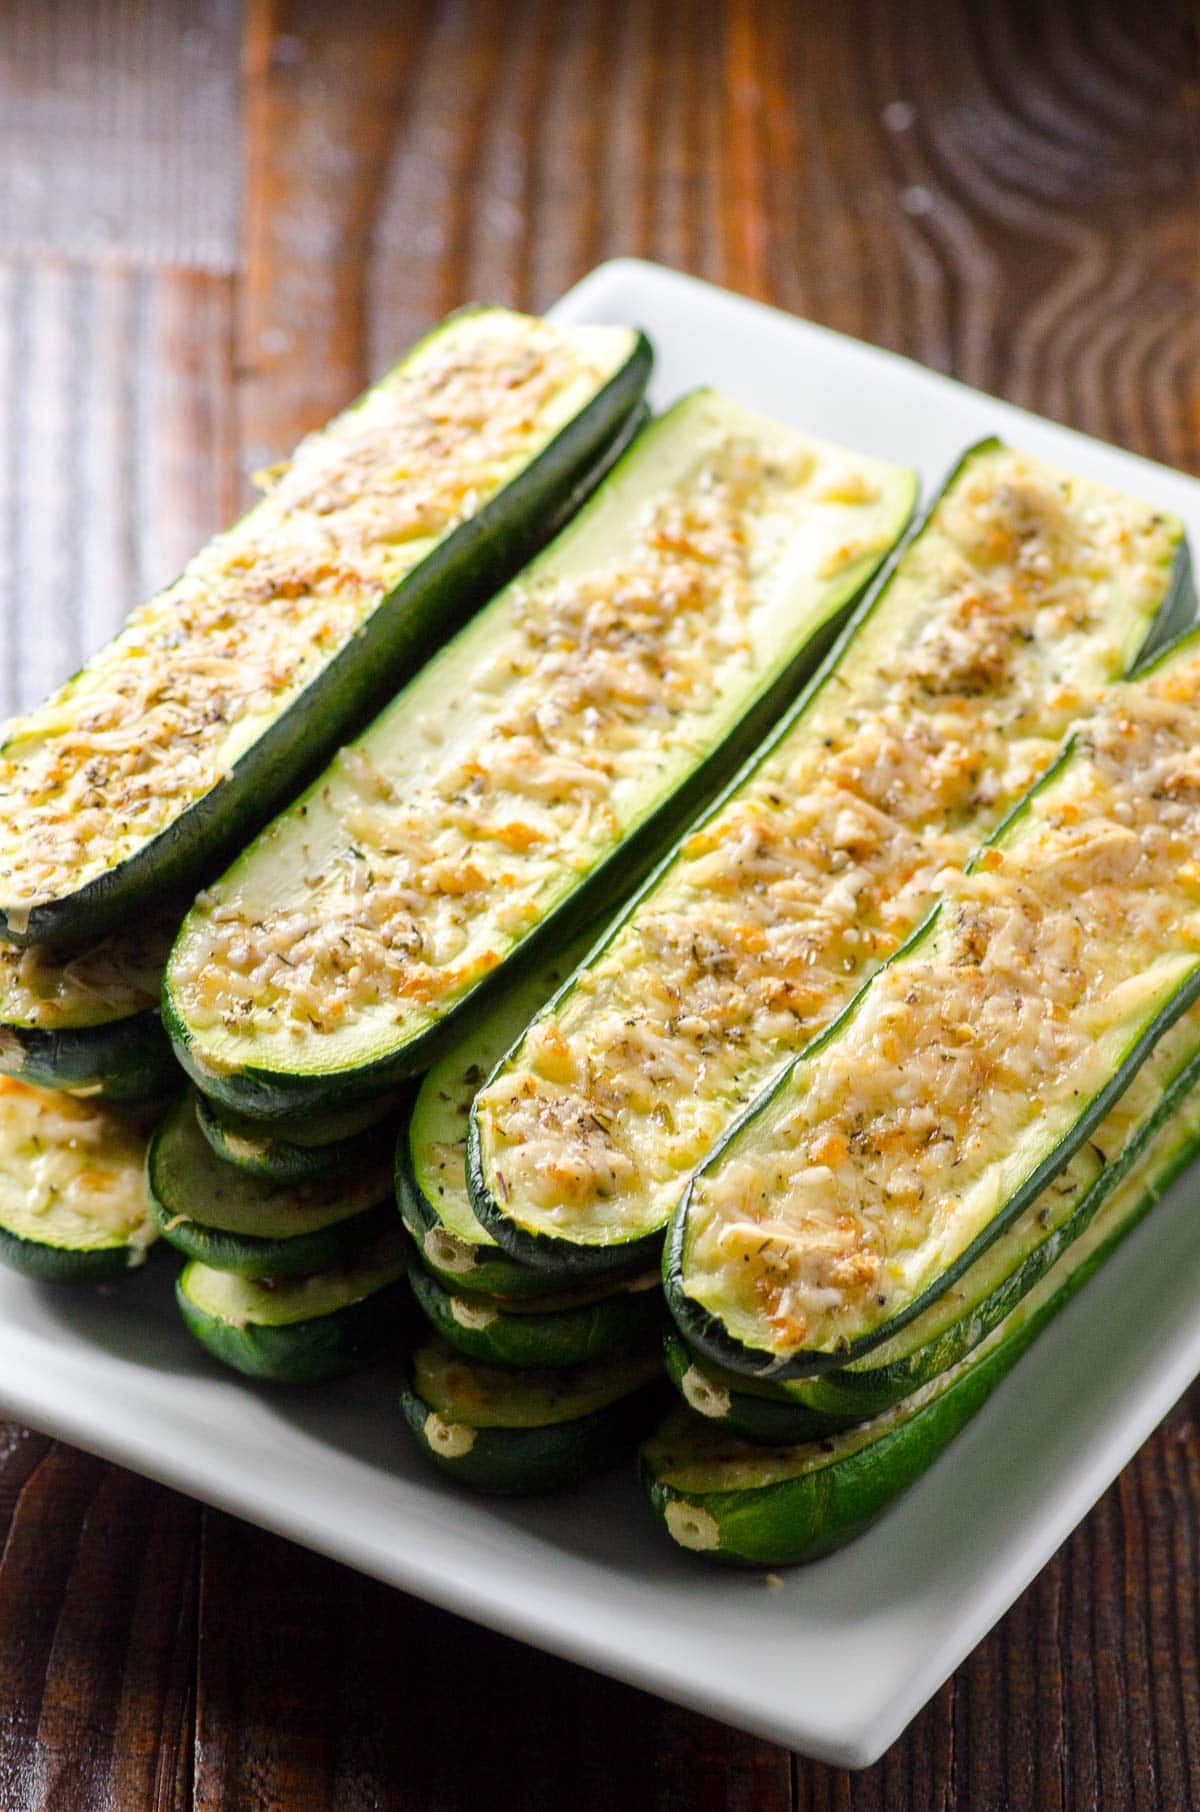 A side view of baked parmesan zucchini sticks.